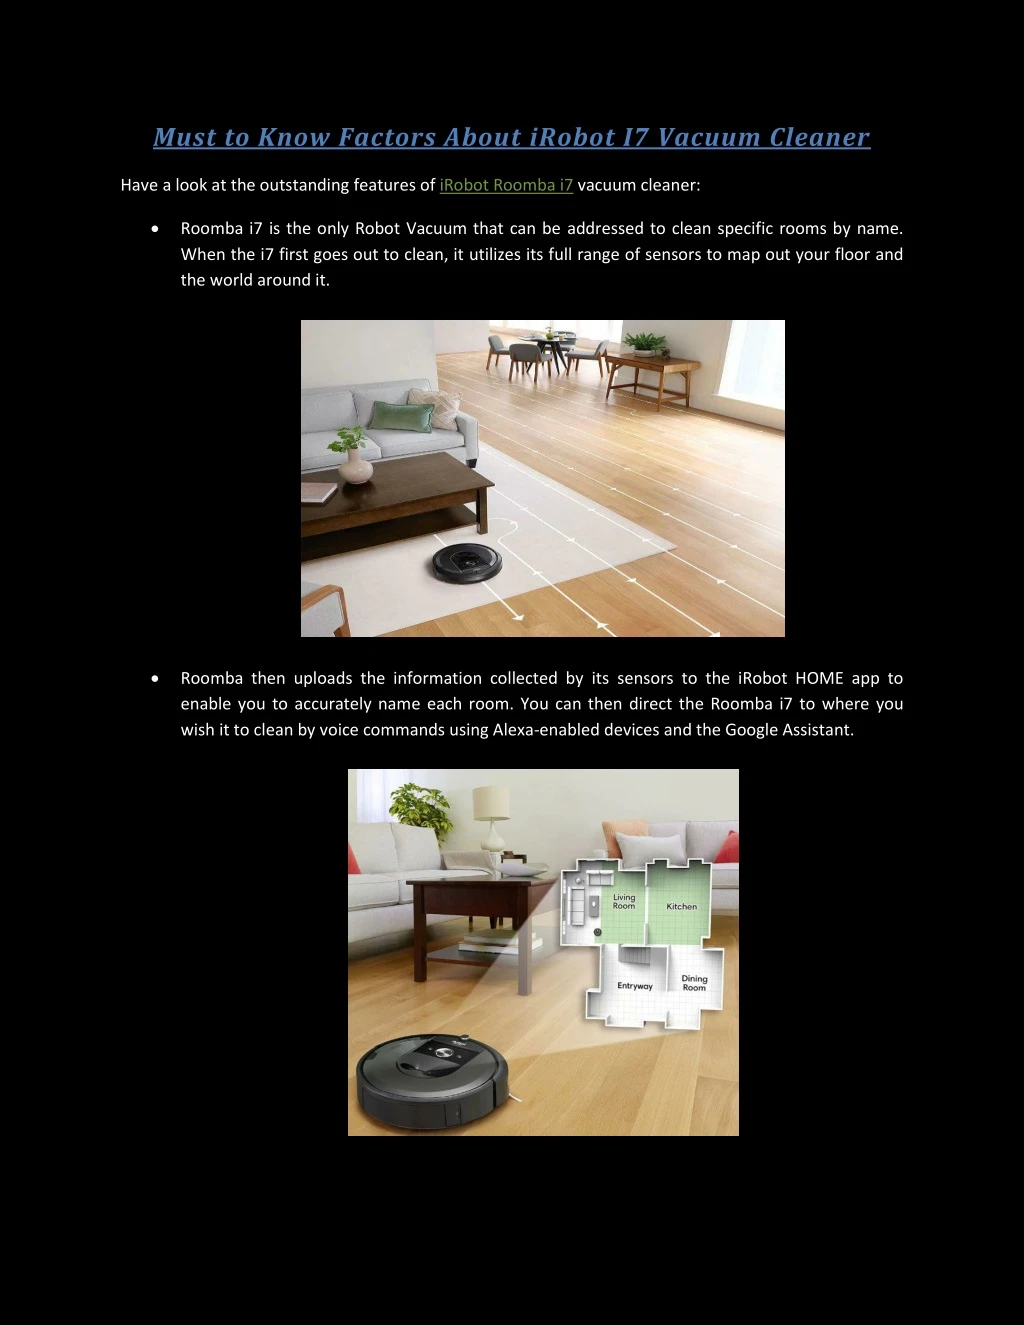 must to know factors about irobot i7 vacuum